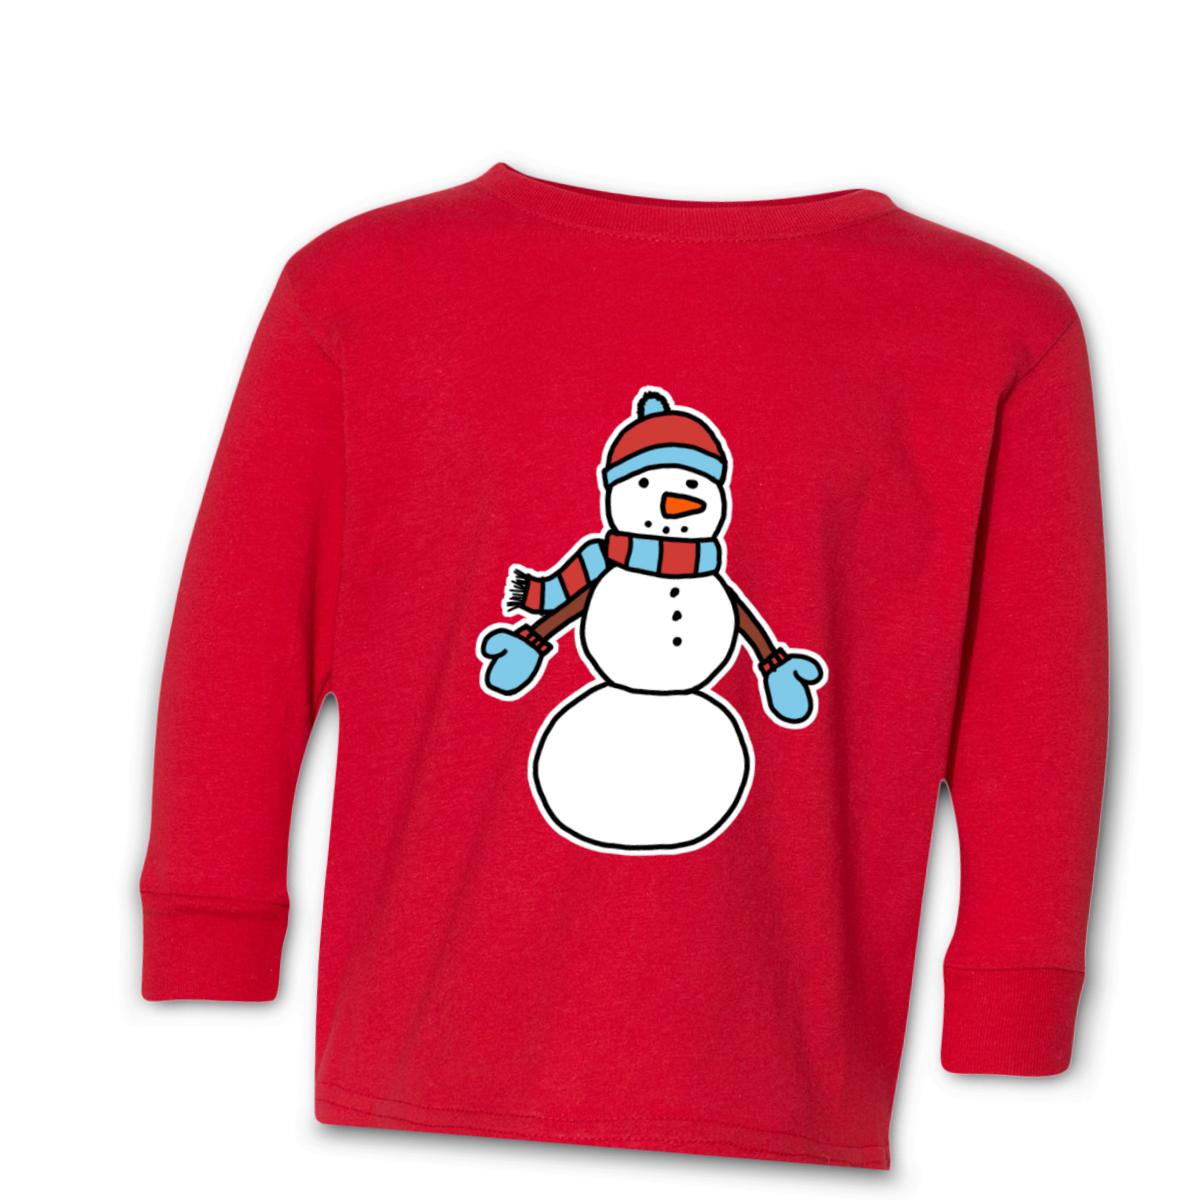 Snowman Bundled Up Toddler Long Sleeve Tee 4T red